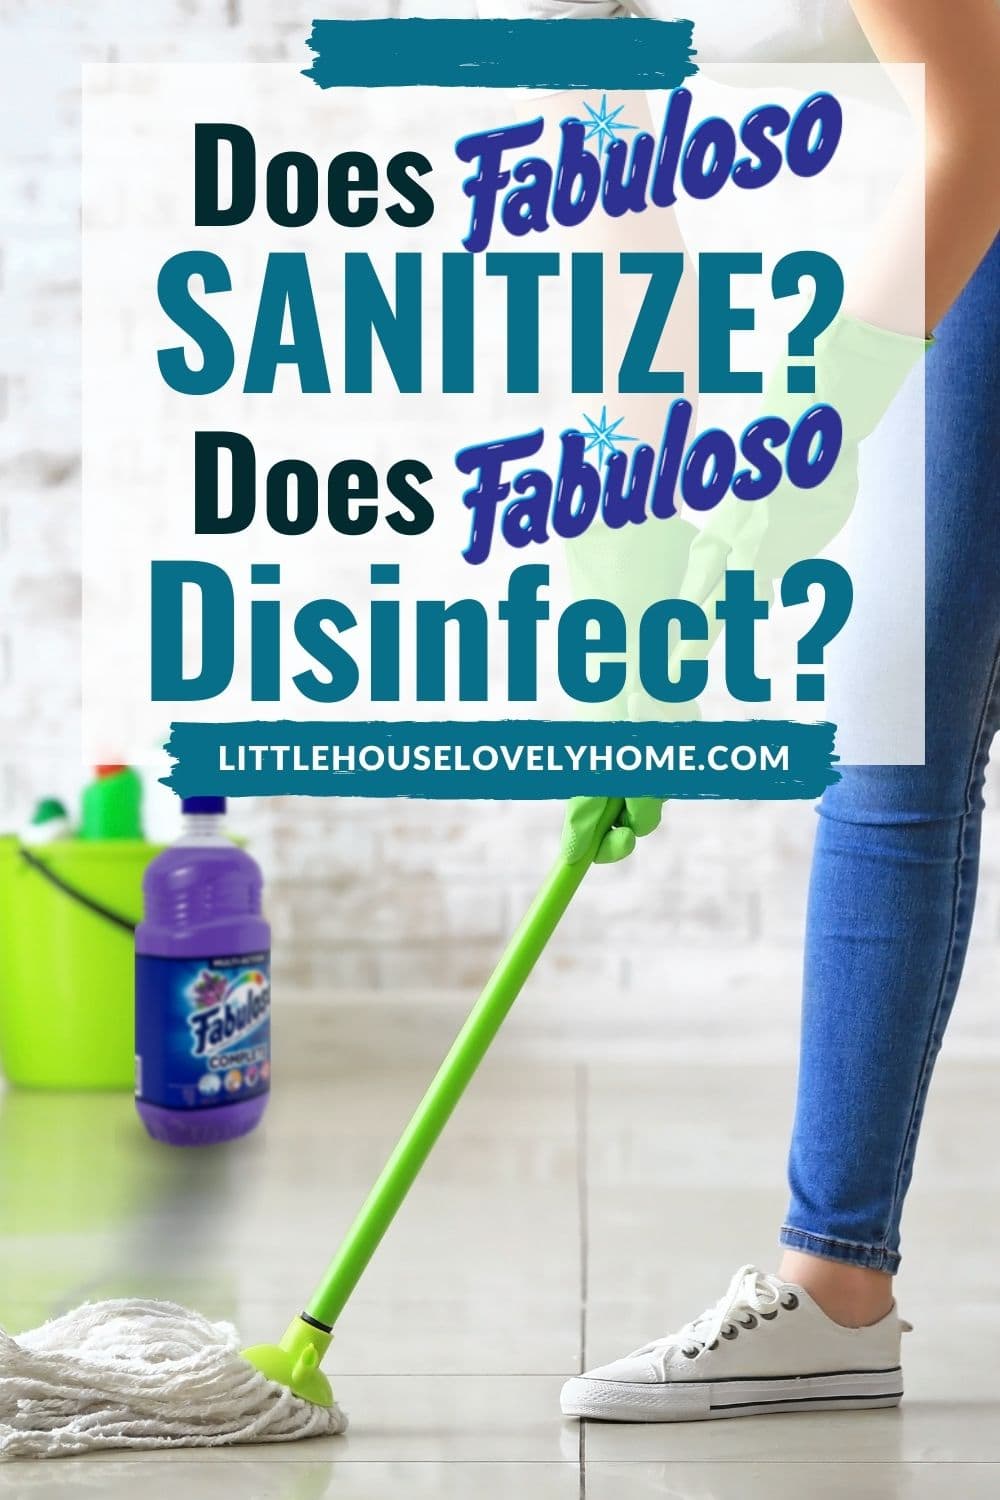 Image showing a person mopping the flor and cleaning items at the background with text overlay that reads Does fabuloso sanitize, Does Fabuloso Disinfect